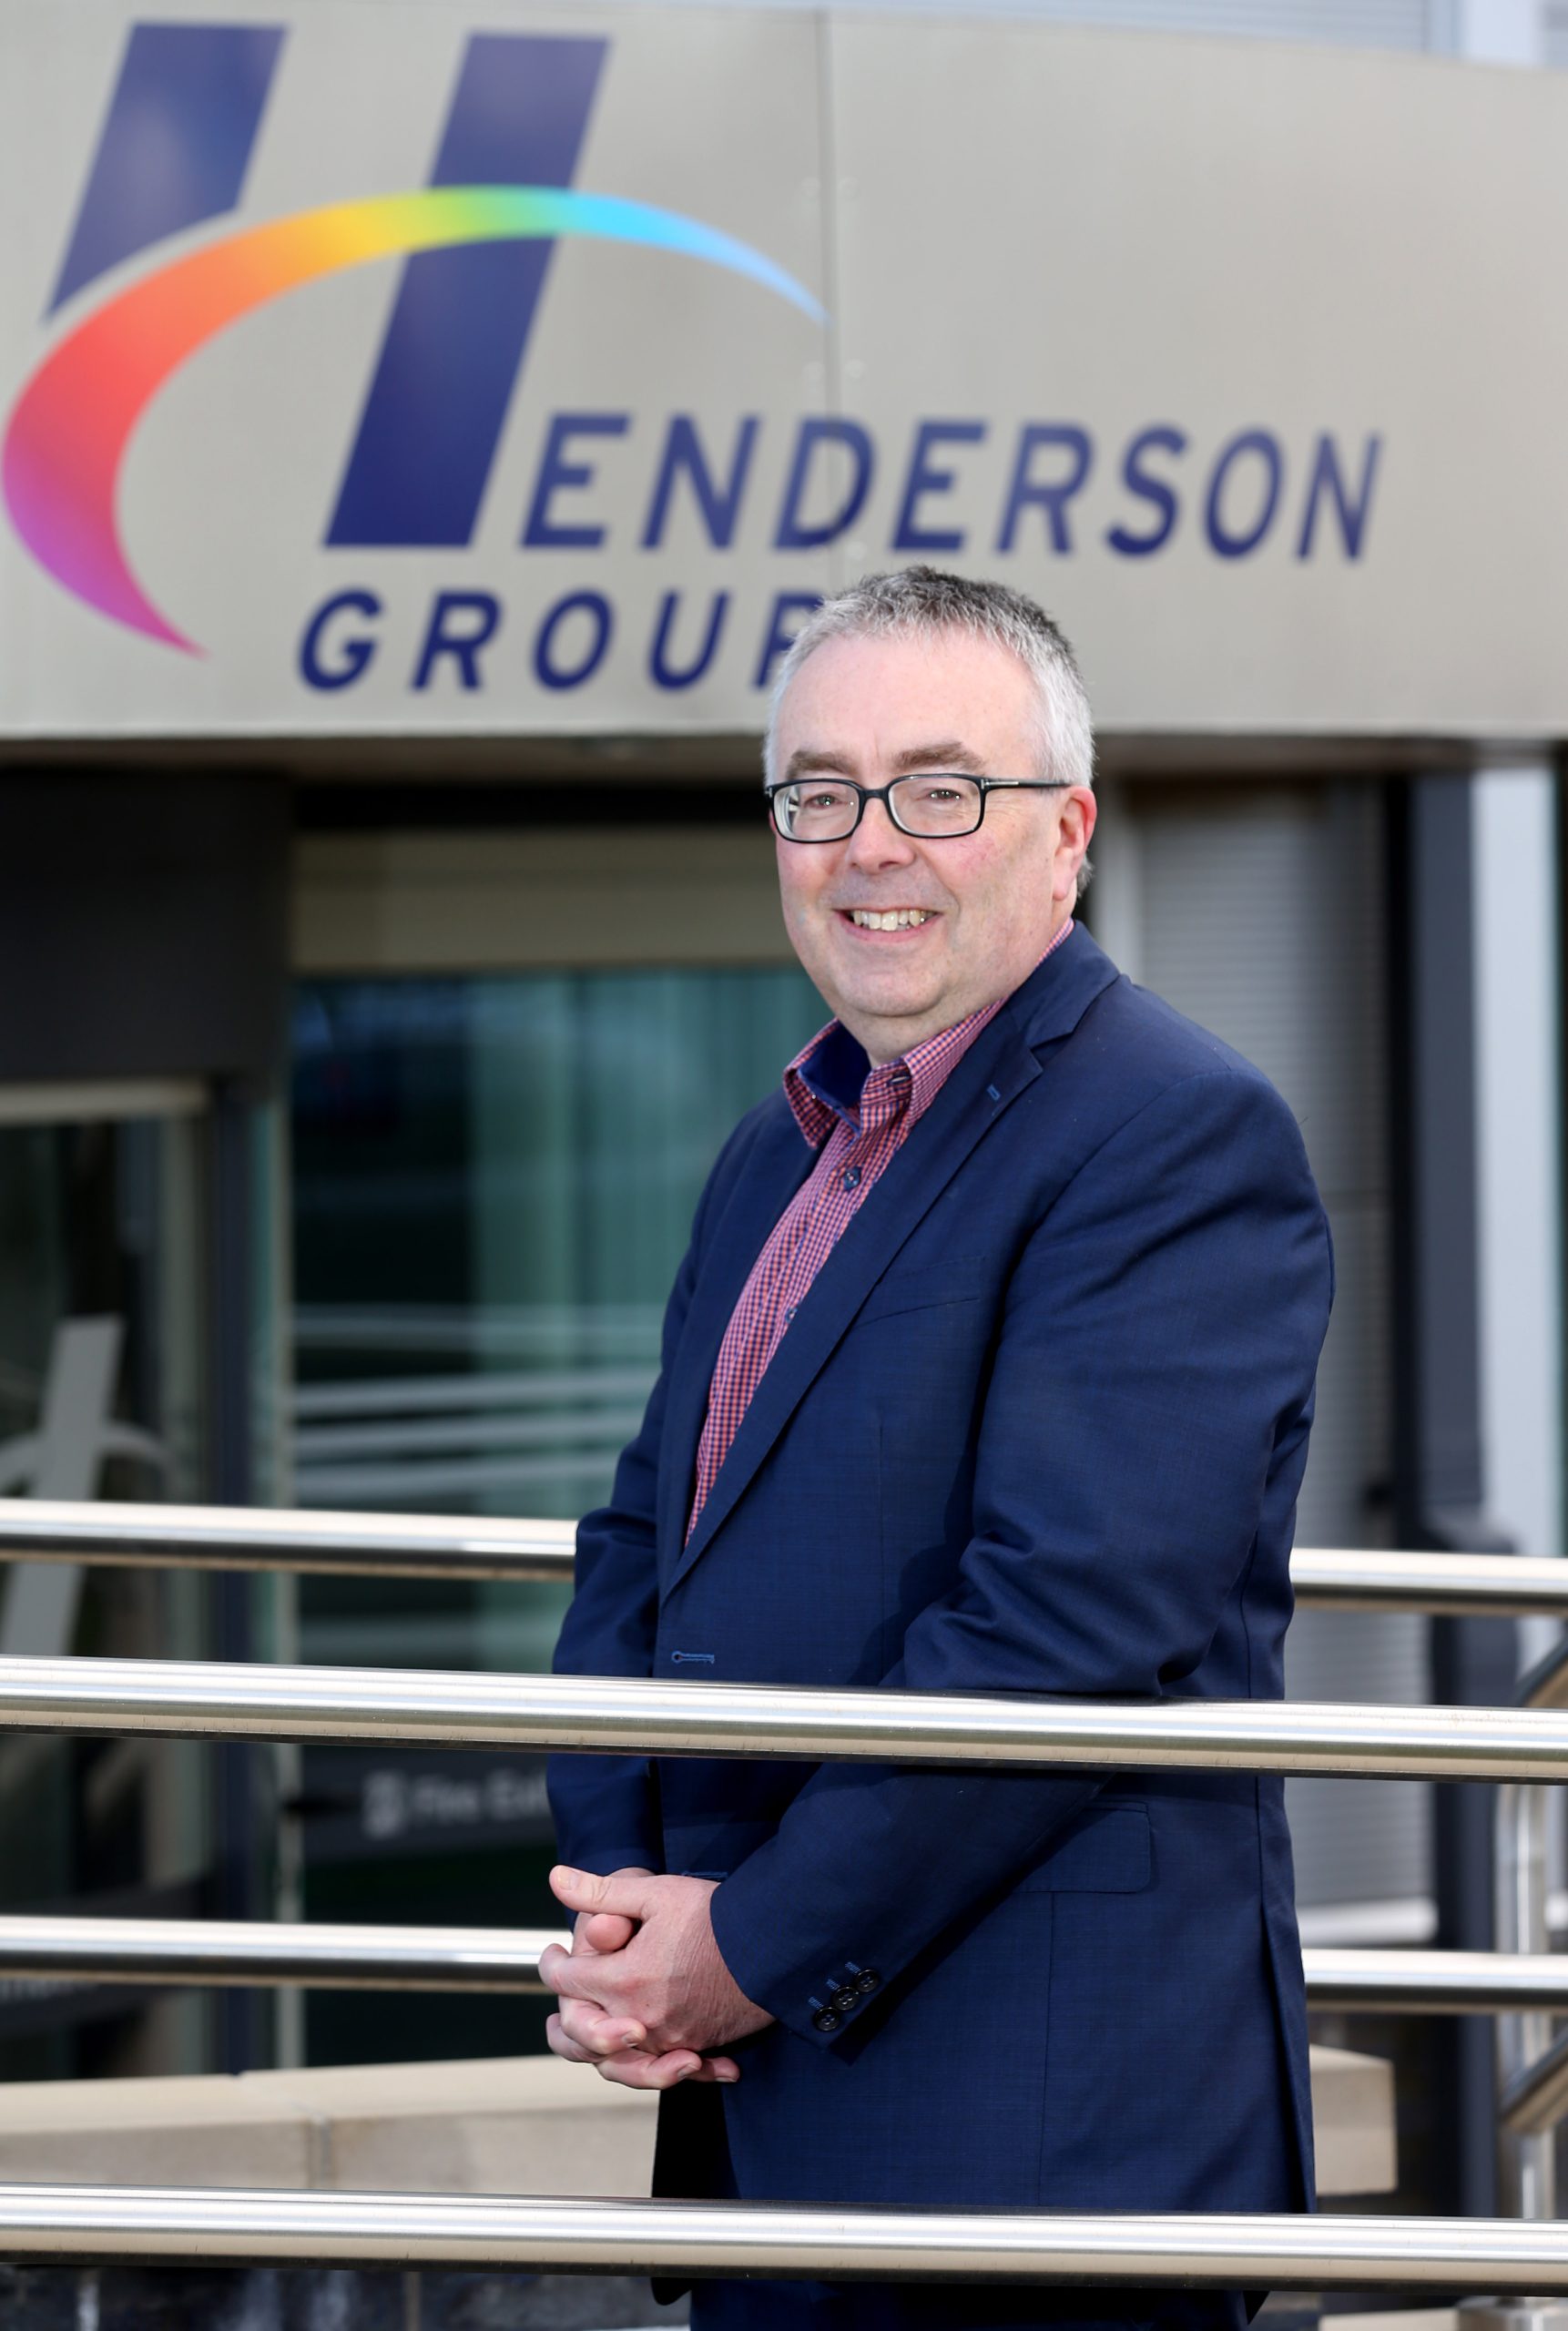 Henderson retail ‘now ahead of where it was in 2019’